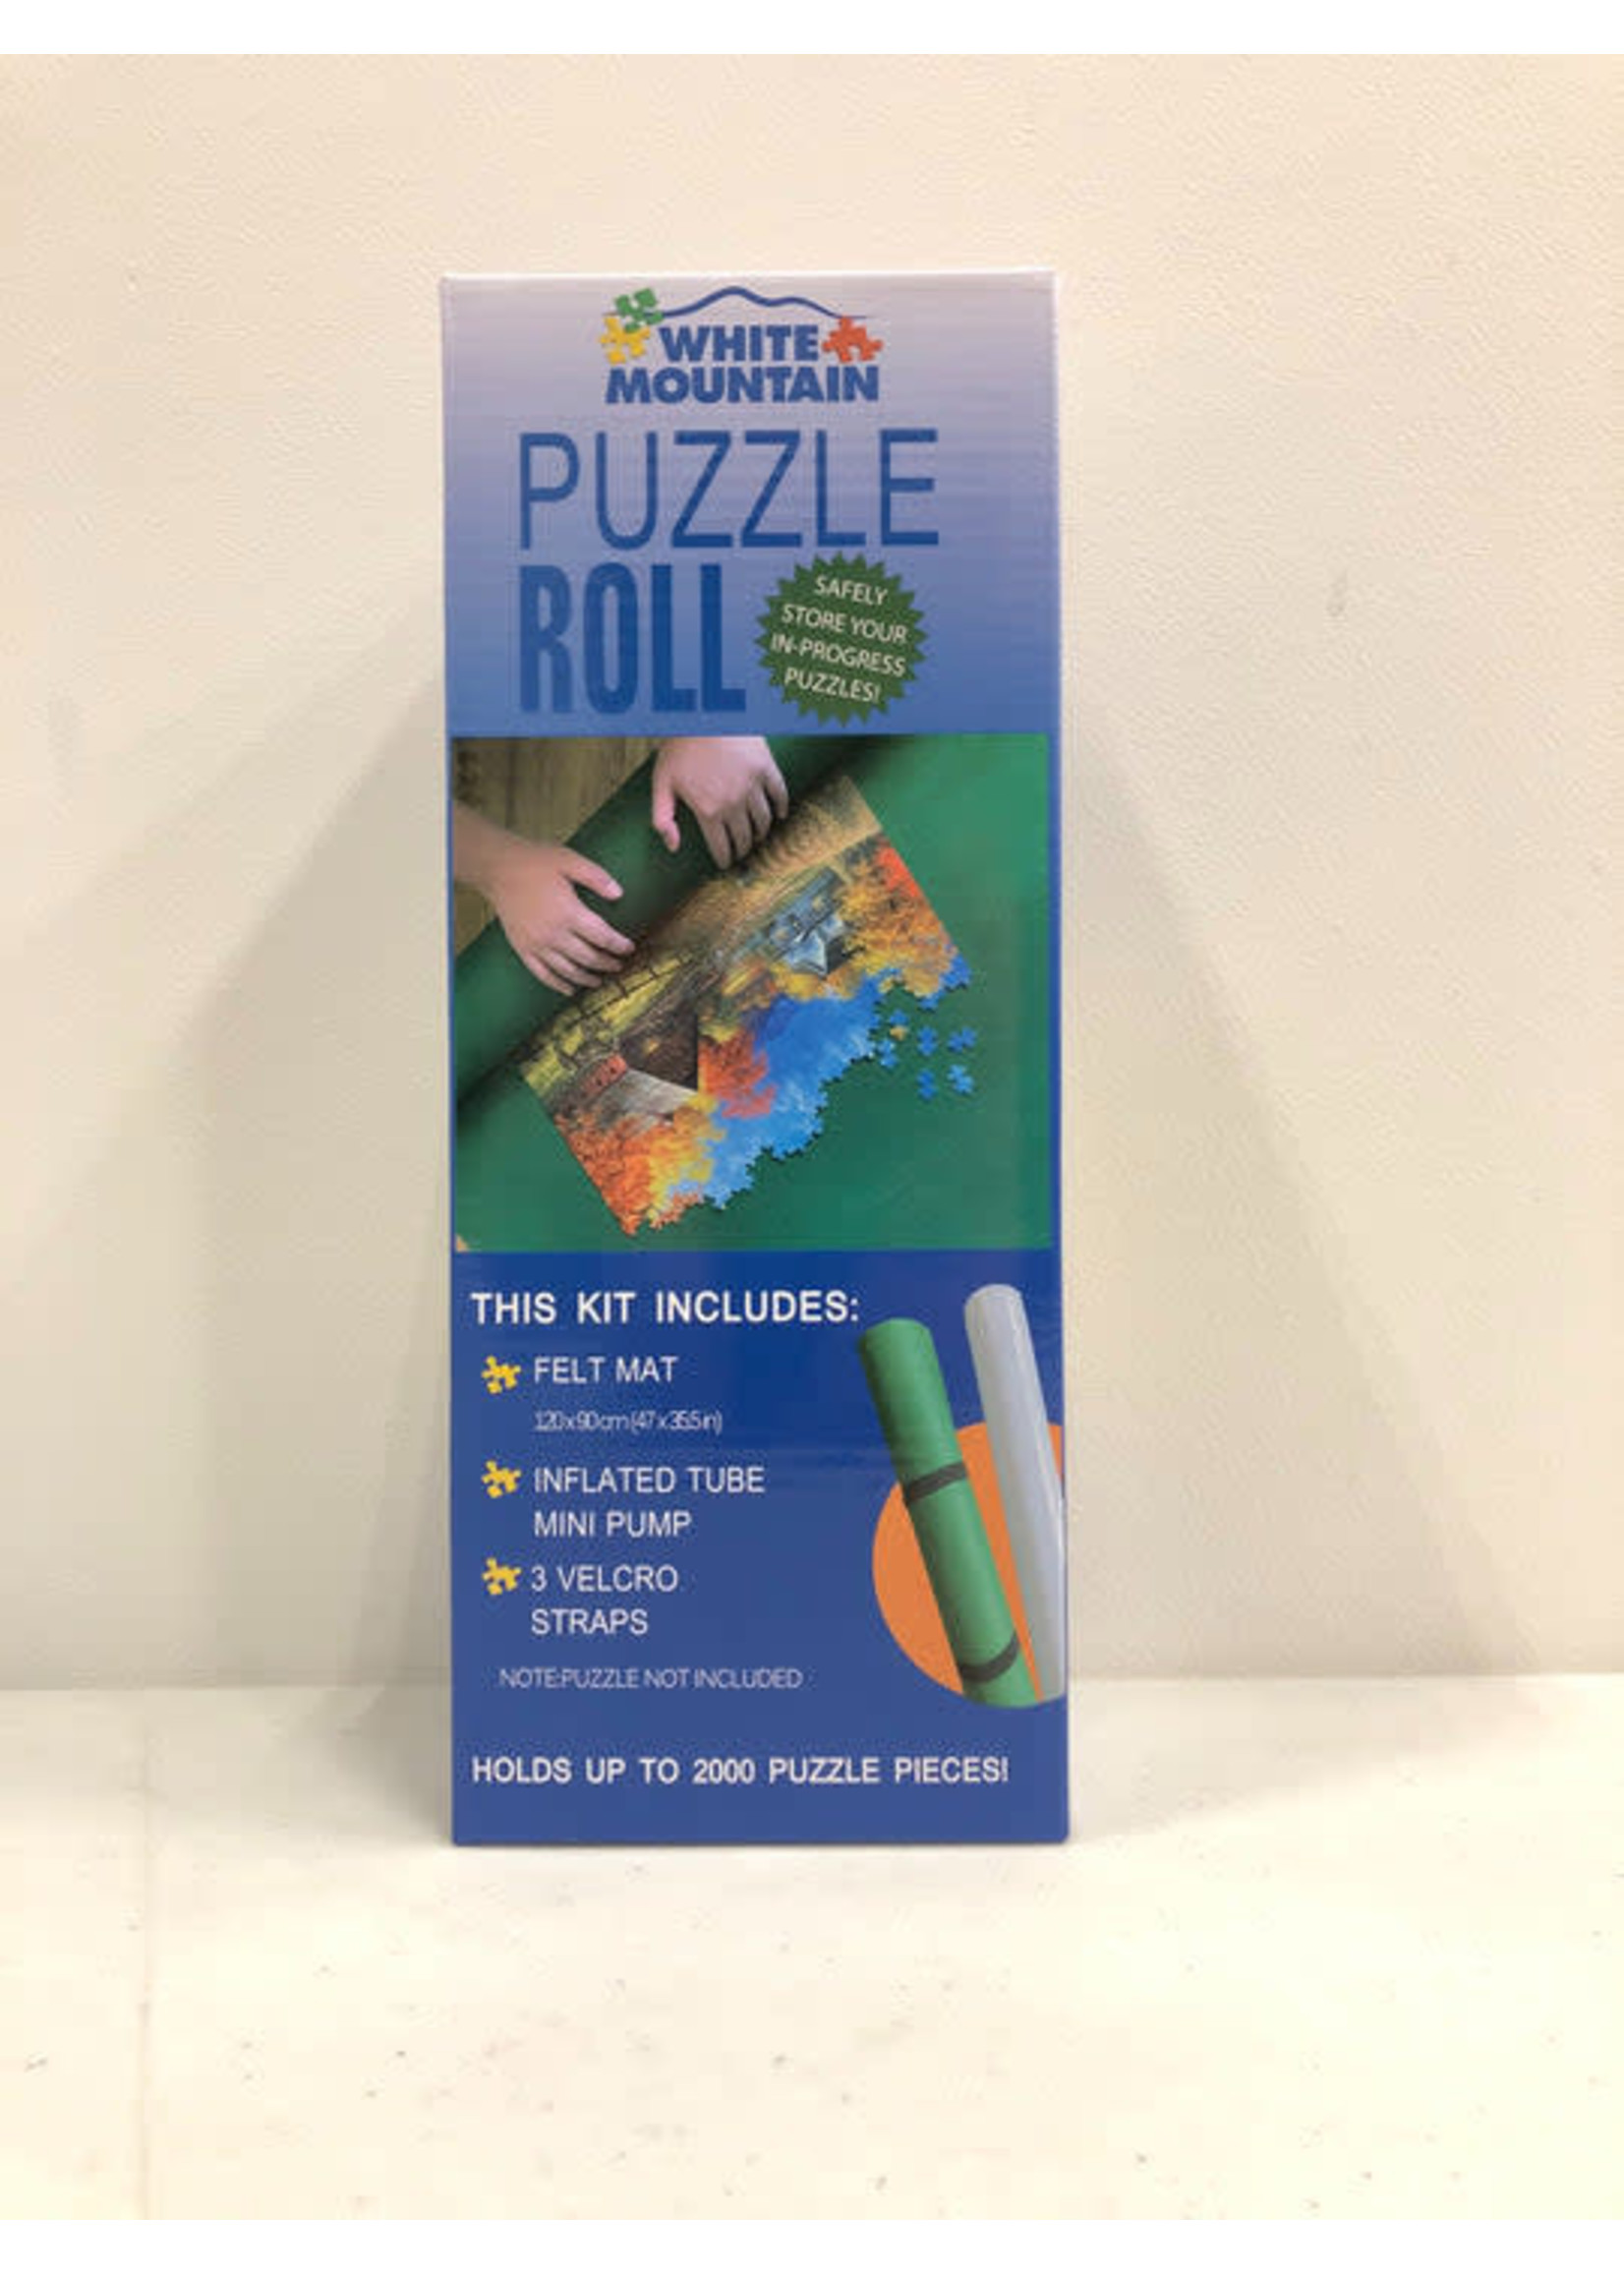 Puzzle Roll Up Mat boxed